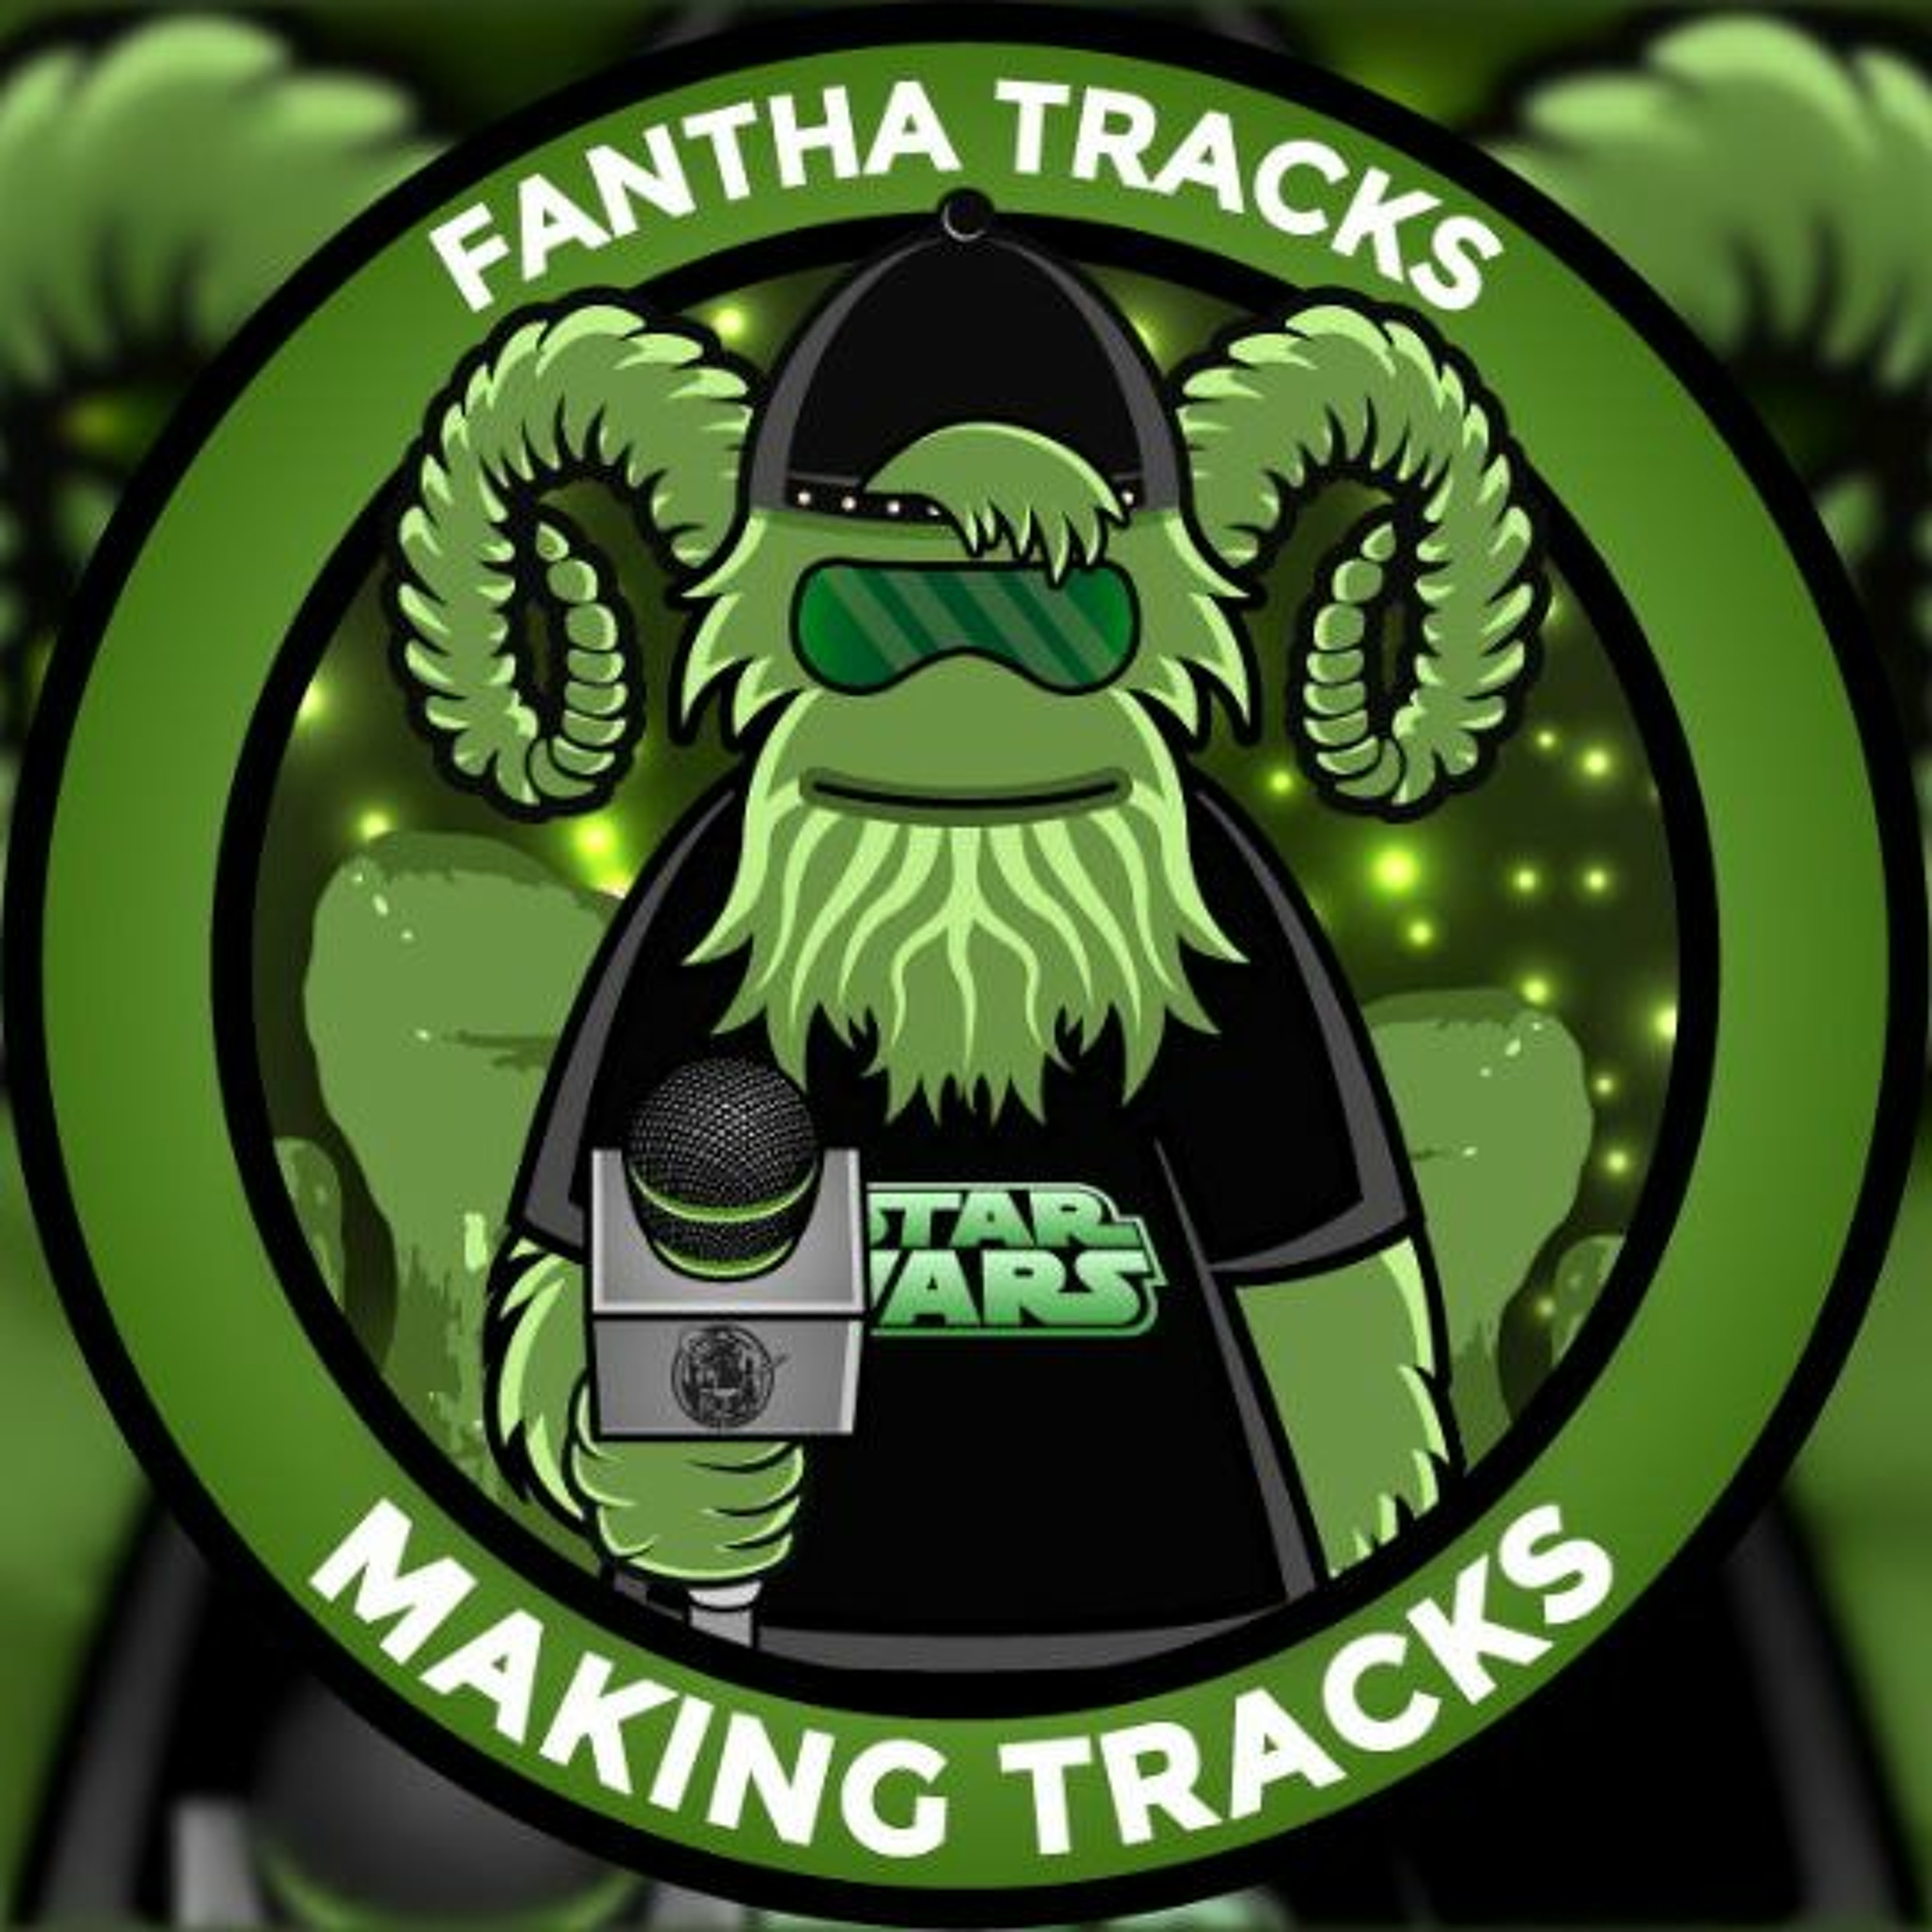 Making Tracks Episode 165: A bit of a spin: With guest Femi Taylor